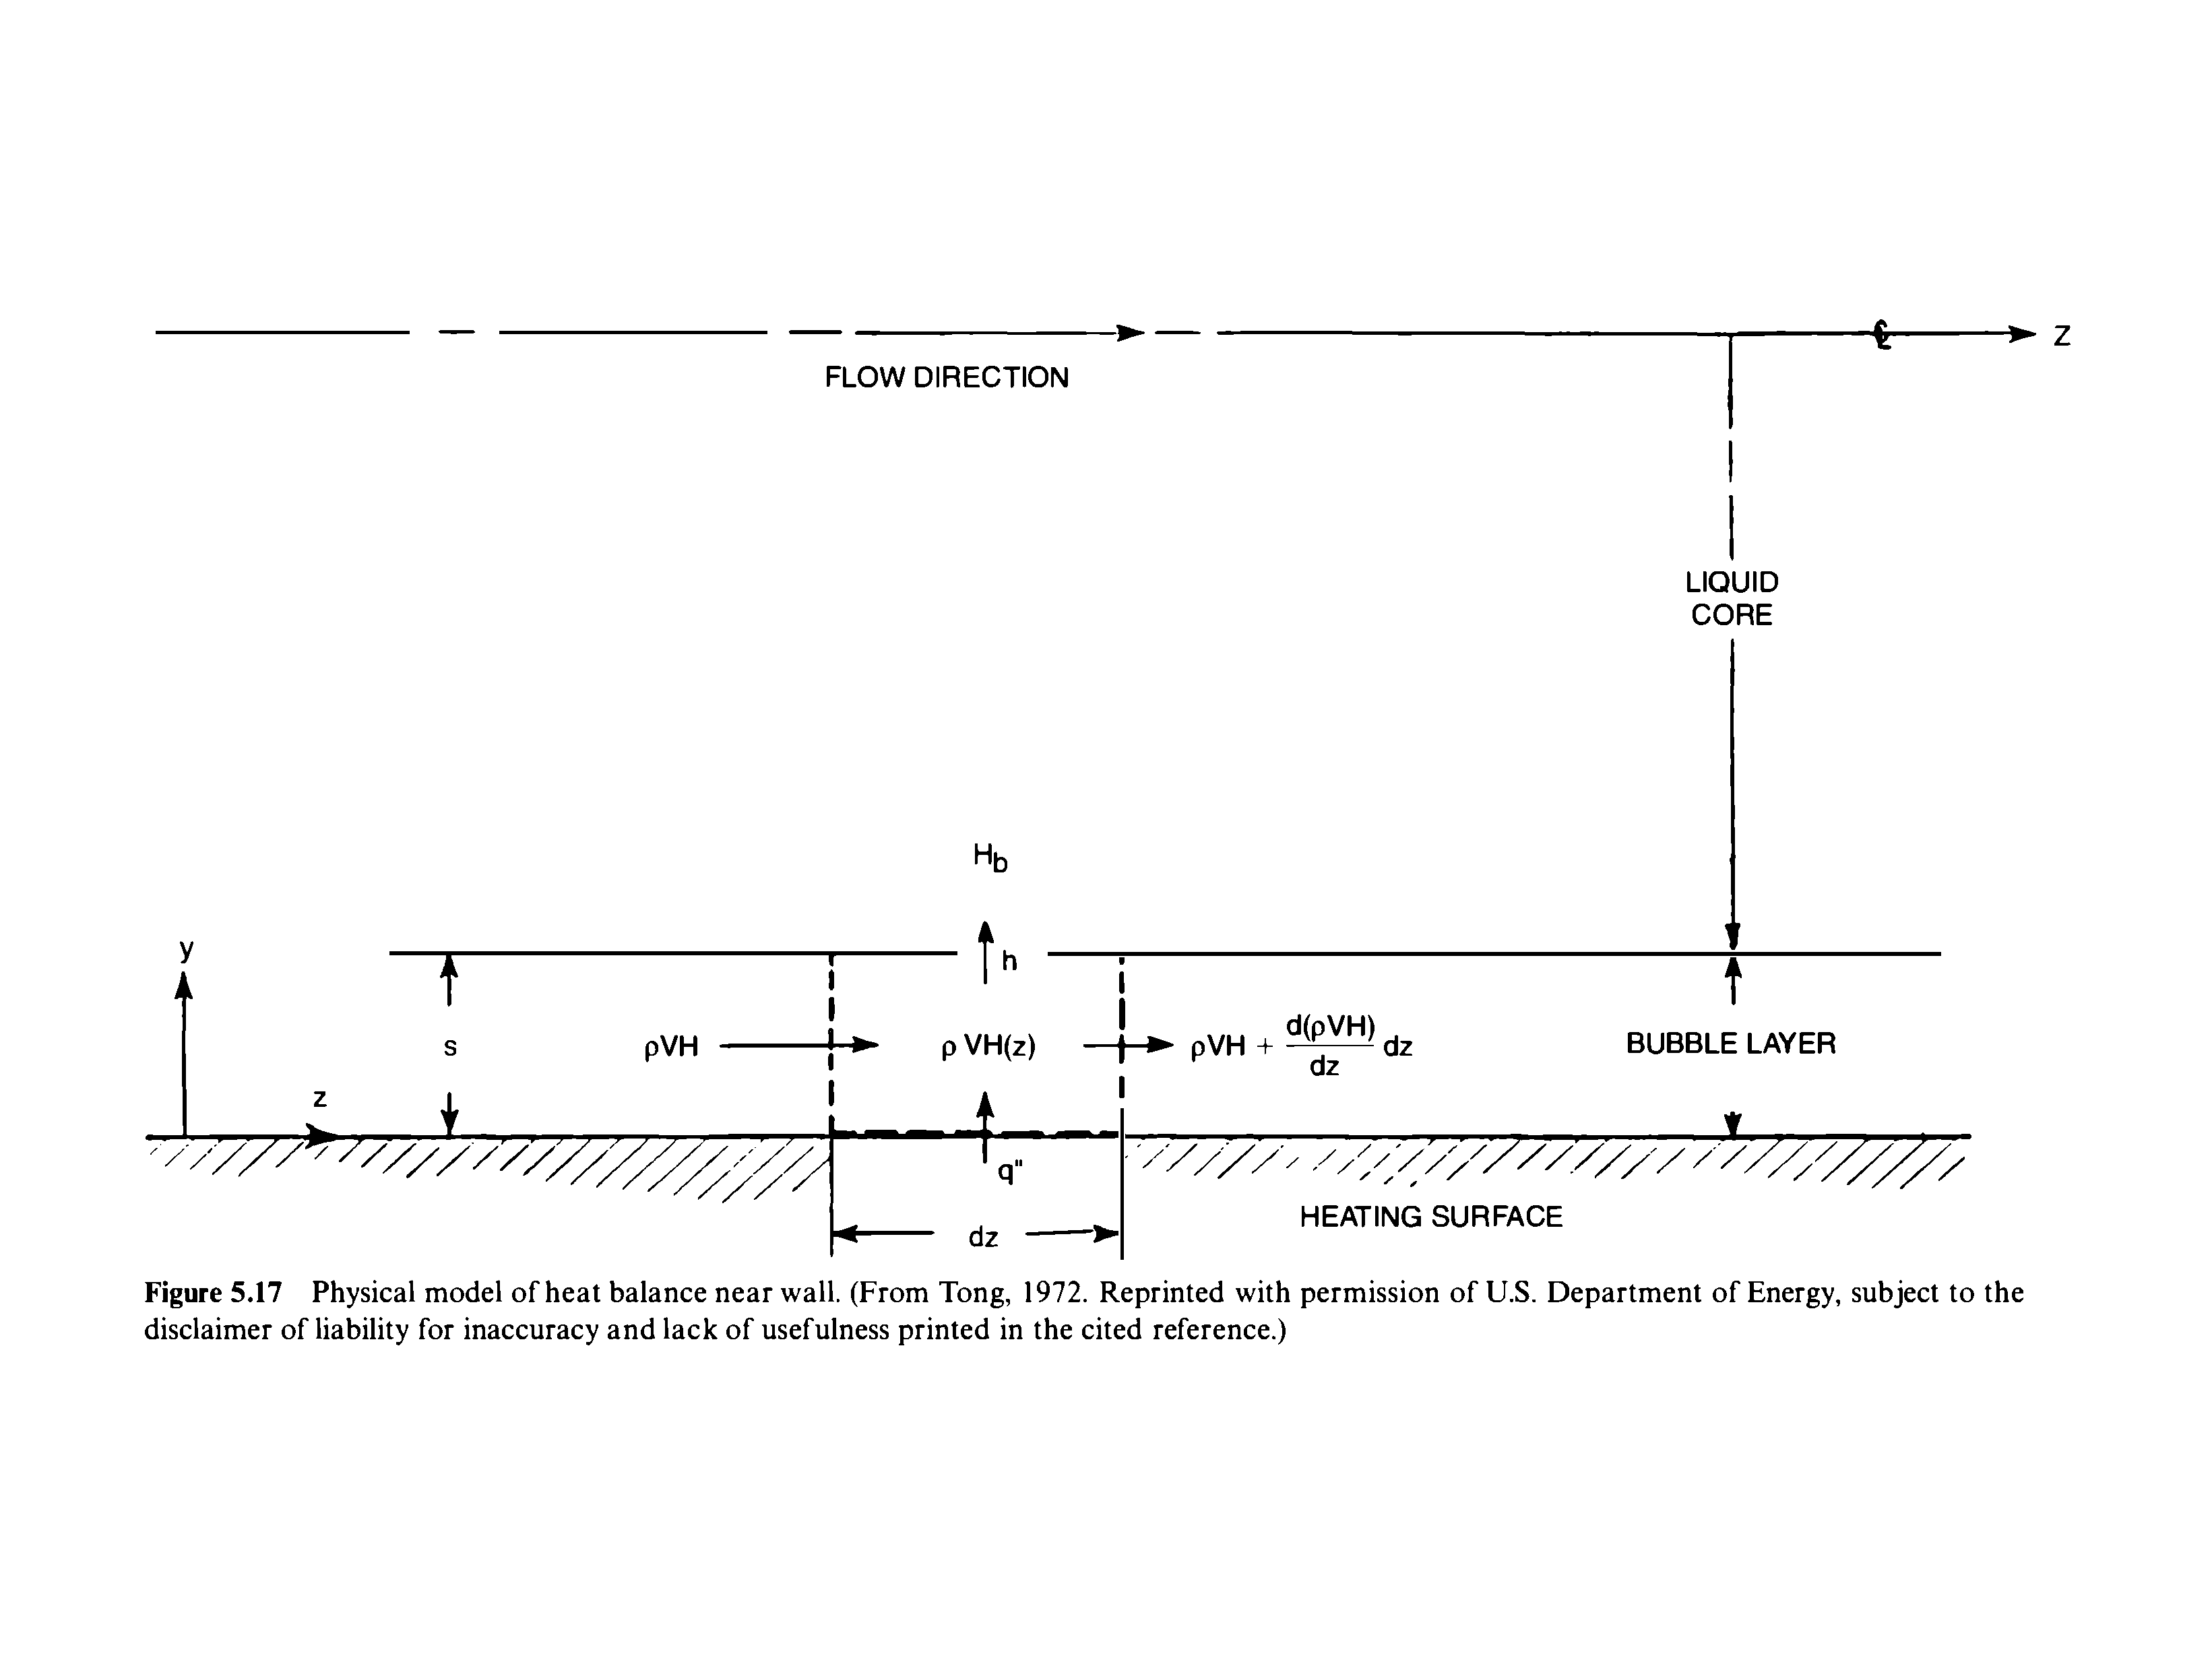 Figure 5.17 Physical model of heat balance near wall. (From Tong, 1972. Reprinted with permission of U.S. Department of Energy, subject to the disclaimer of liability for inaccuracy and lack of usefulness printed in the cited reference.)...